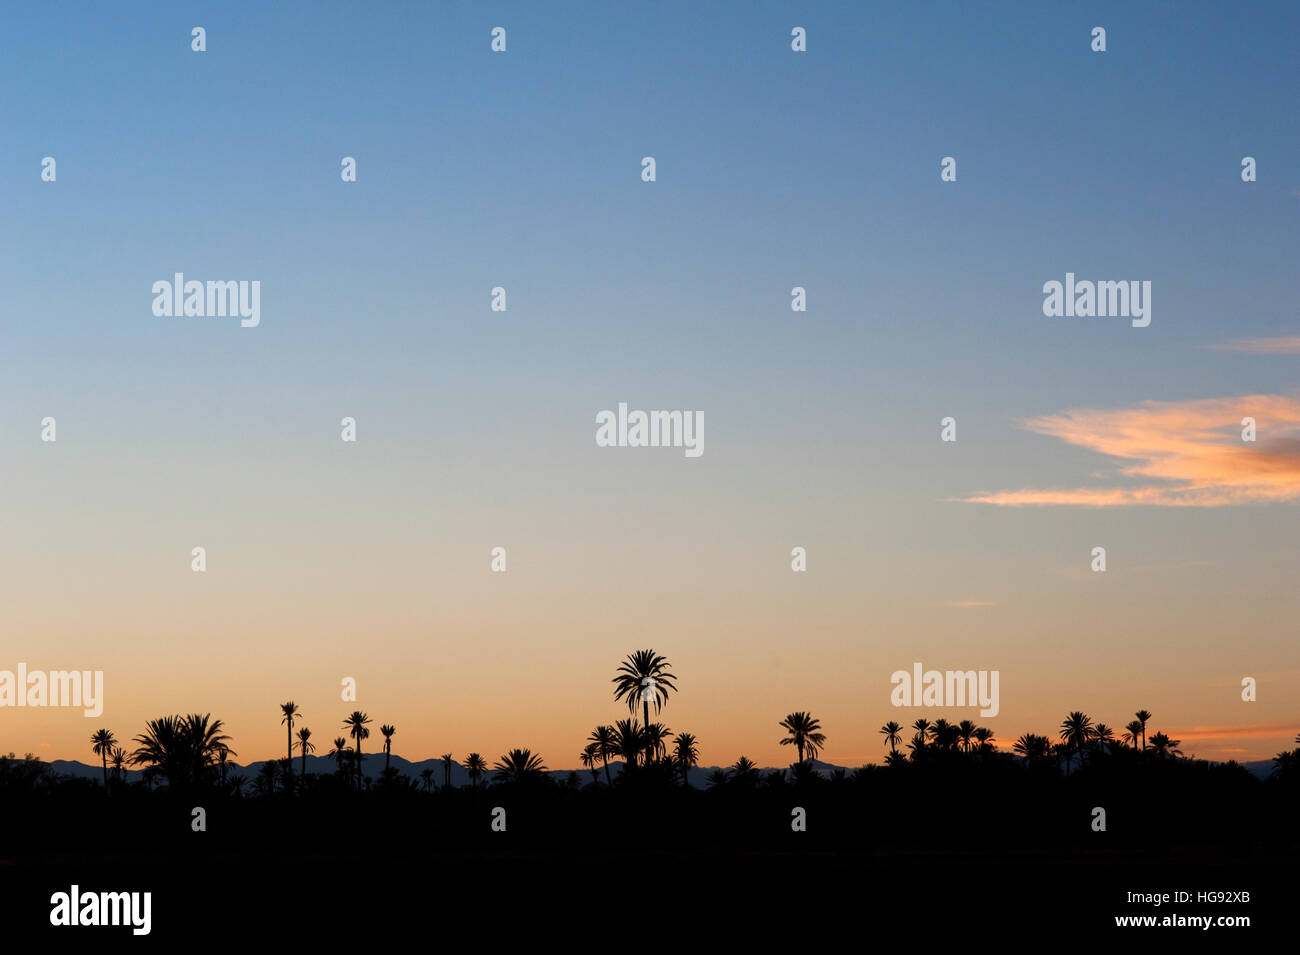 Sunset, Skoura, Morocco. Palm trees silhouetted at sunset in the date palm plantations of Skoura in southern Morocco. Stock Photo